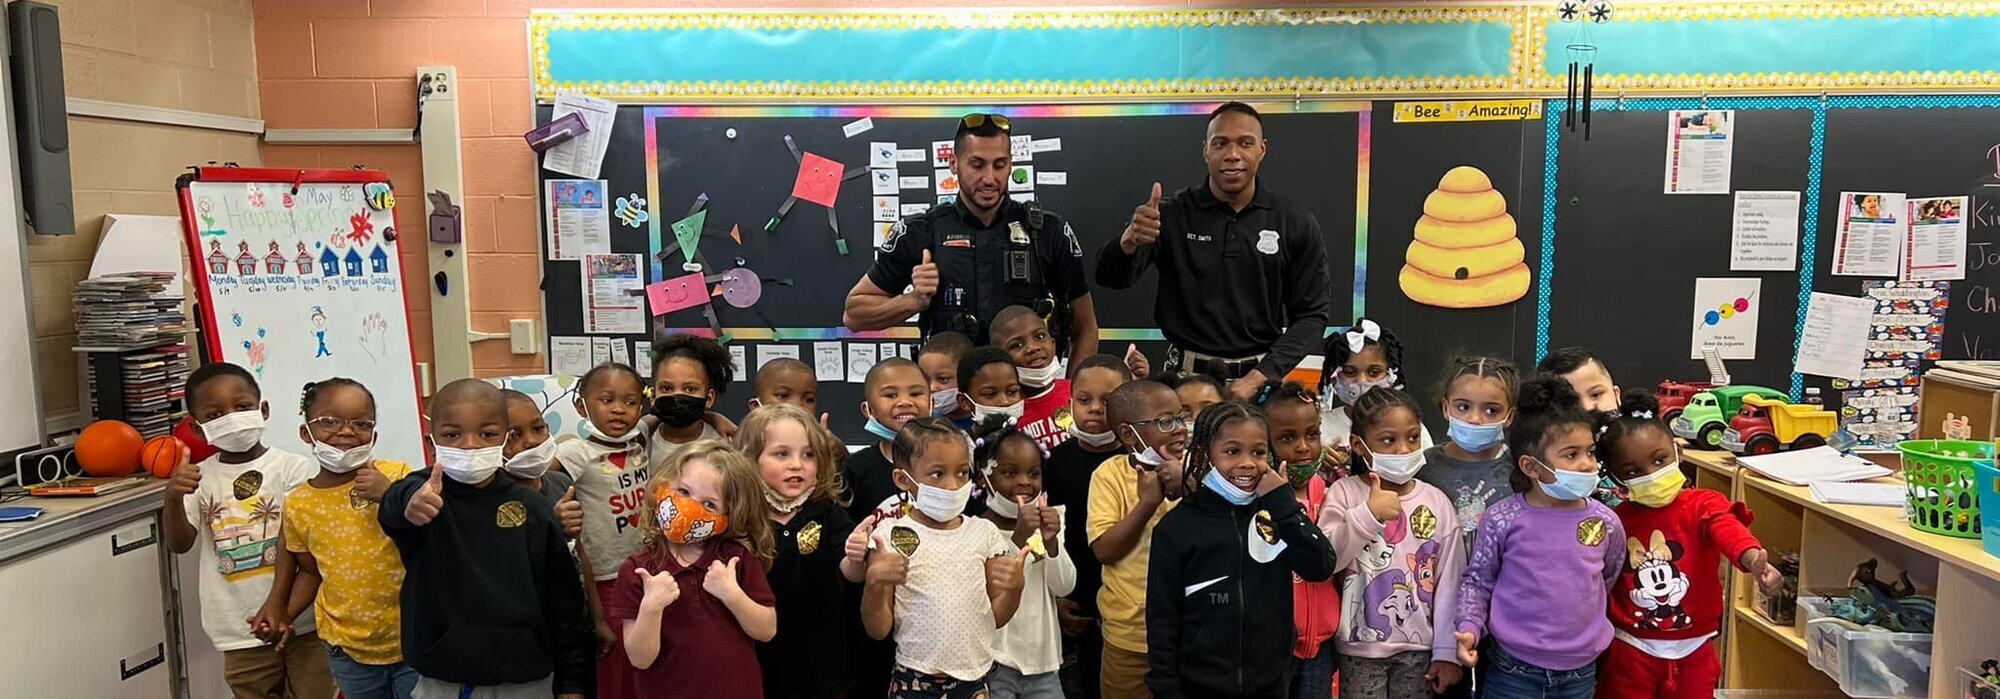 AV GSRP gets a visit from our River Rouge Police Officers!